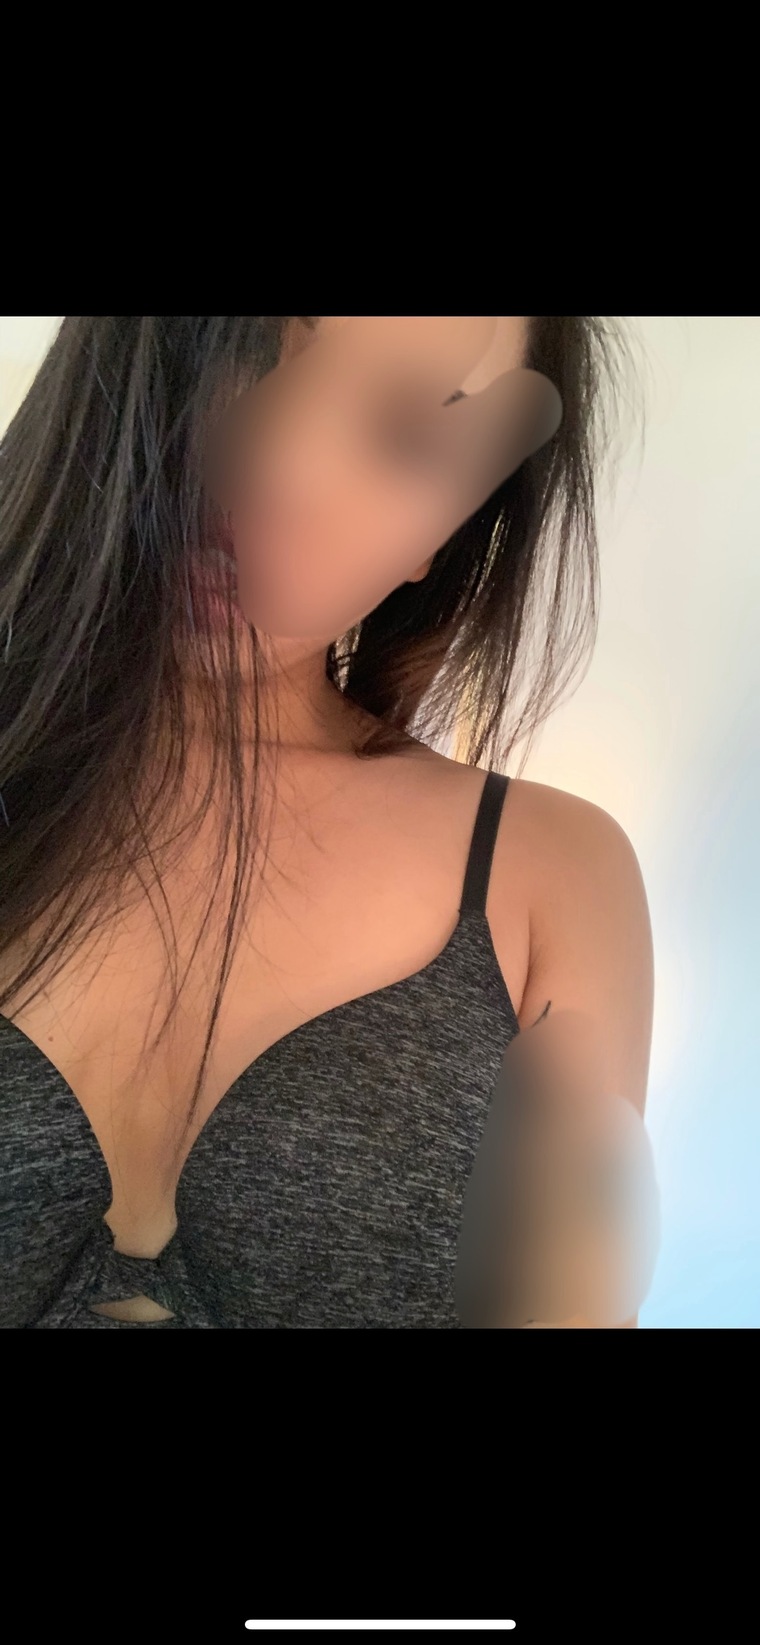 asianamethyst710 on onlyfans